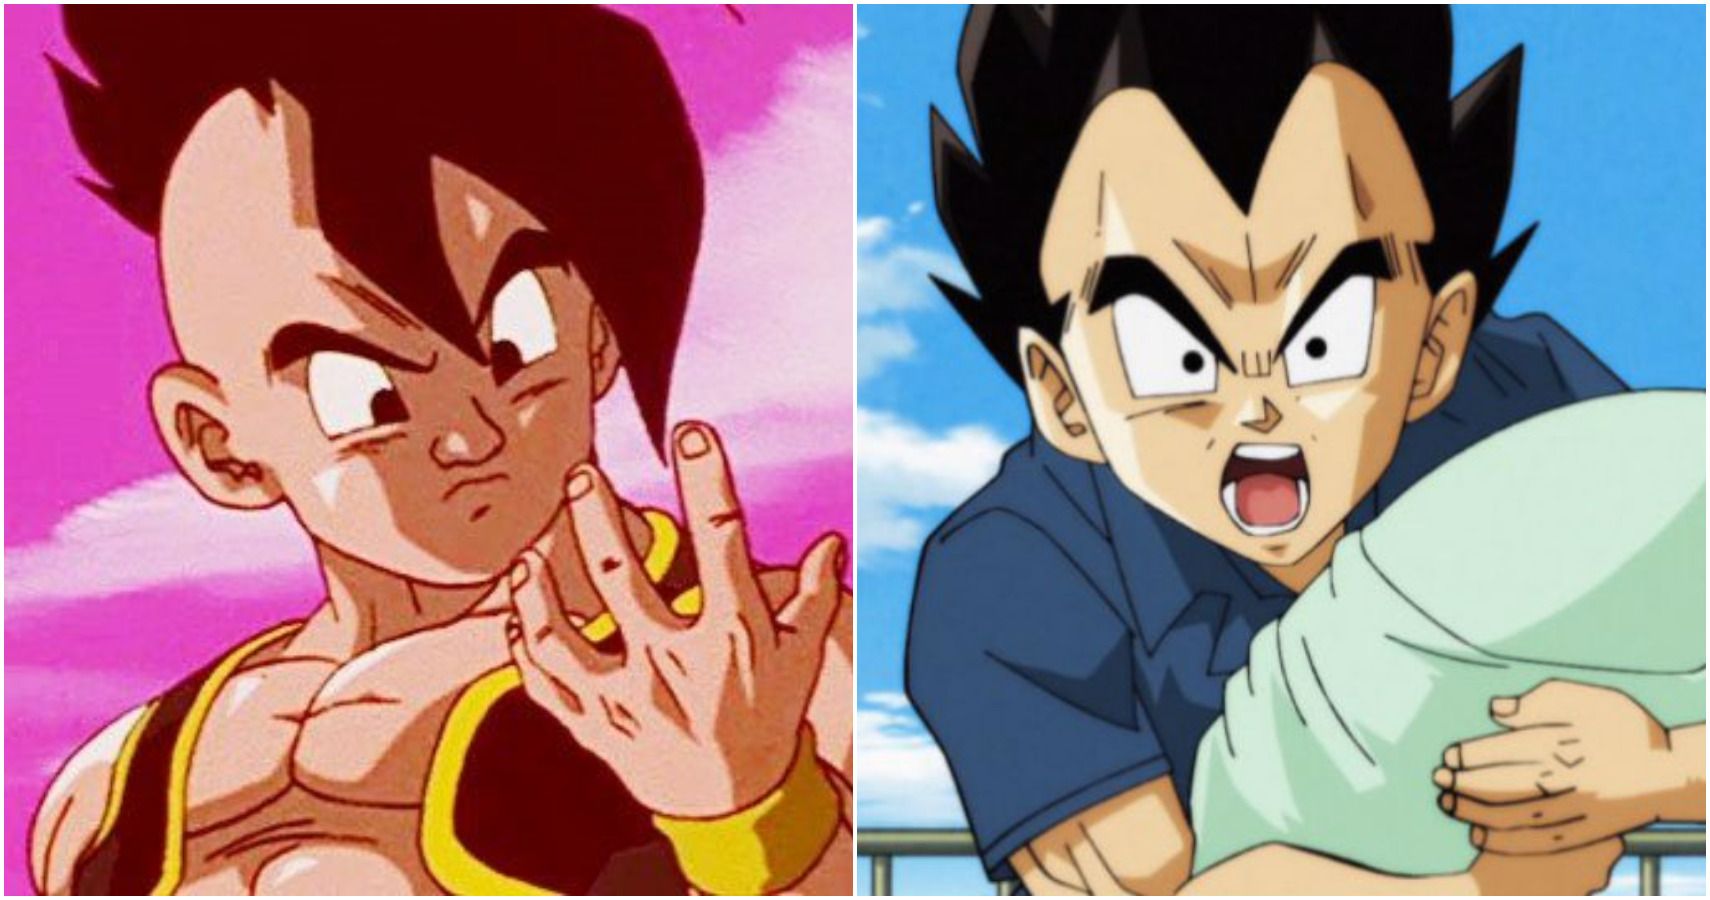 Dragon Ball Z: 5 Reasons Why The Ending was Disappointing (& 5 Things It Got Right)